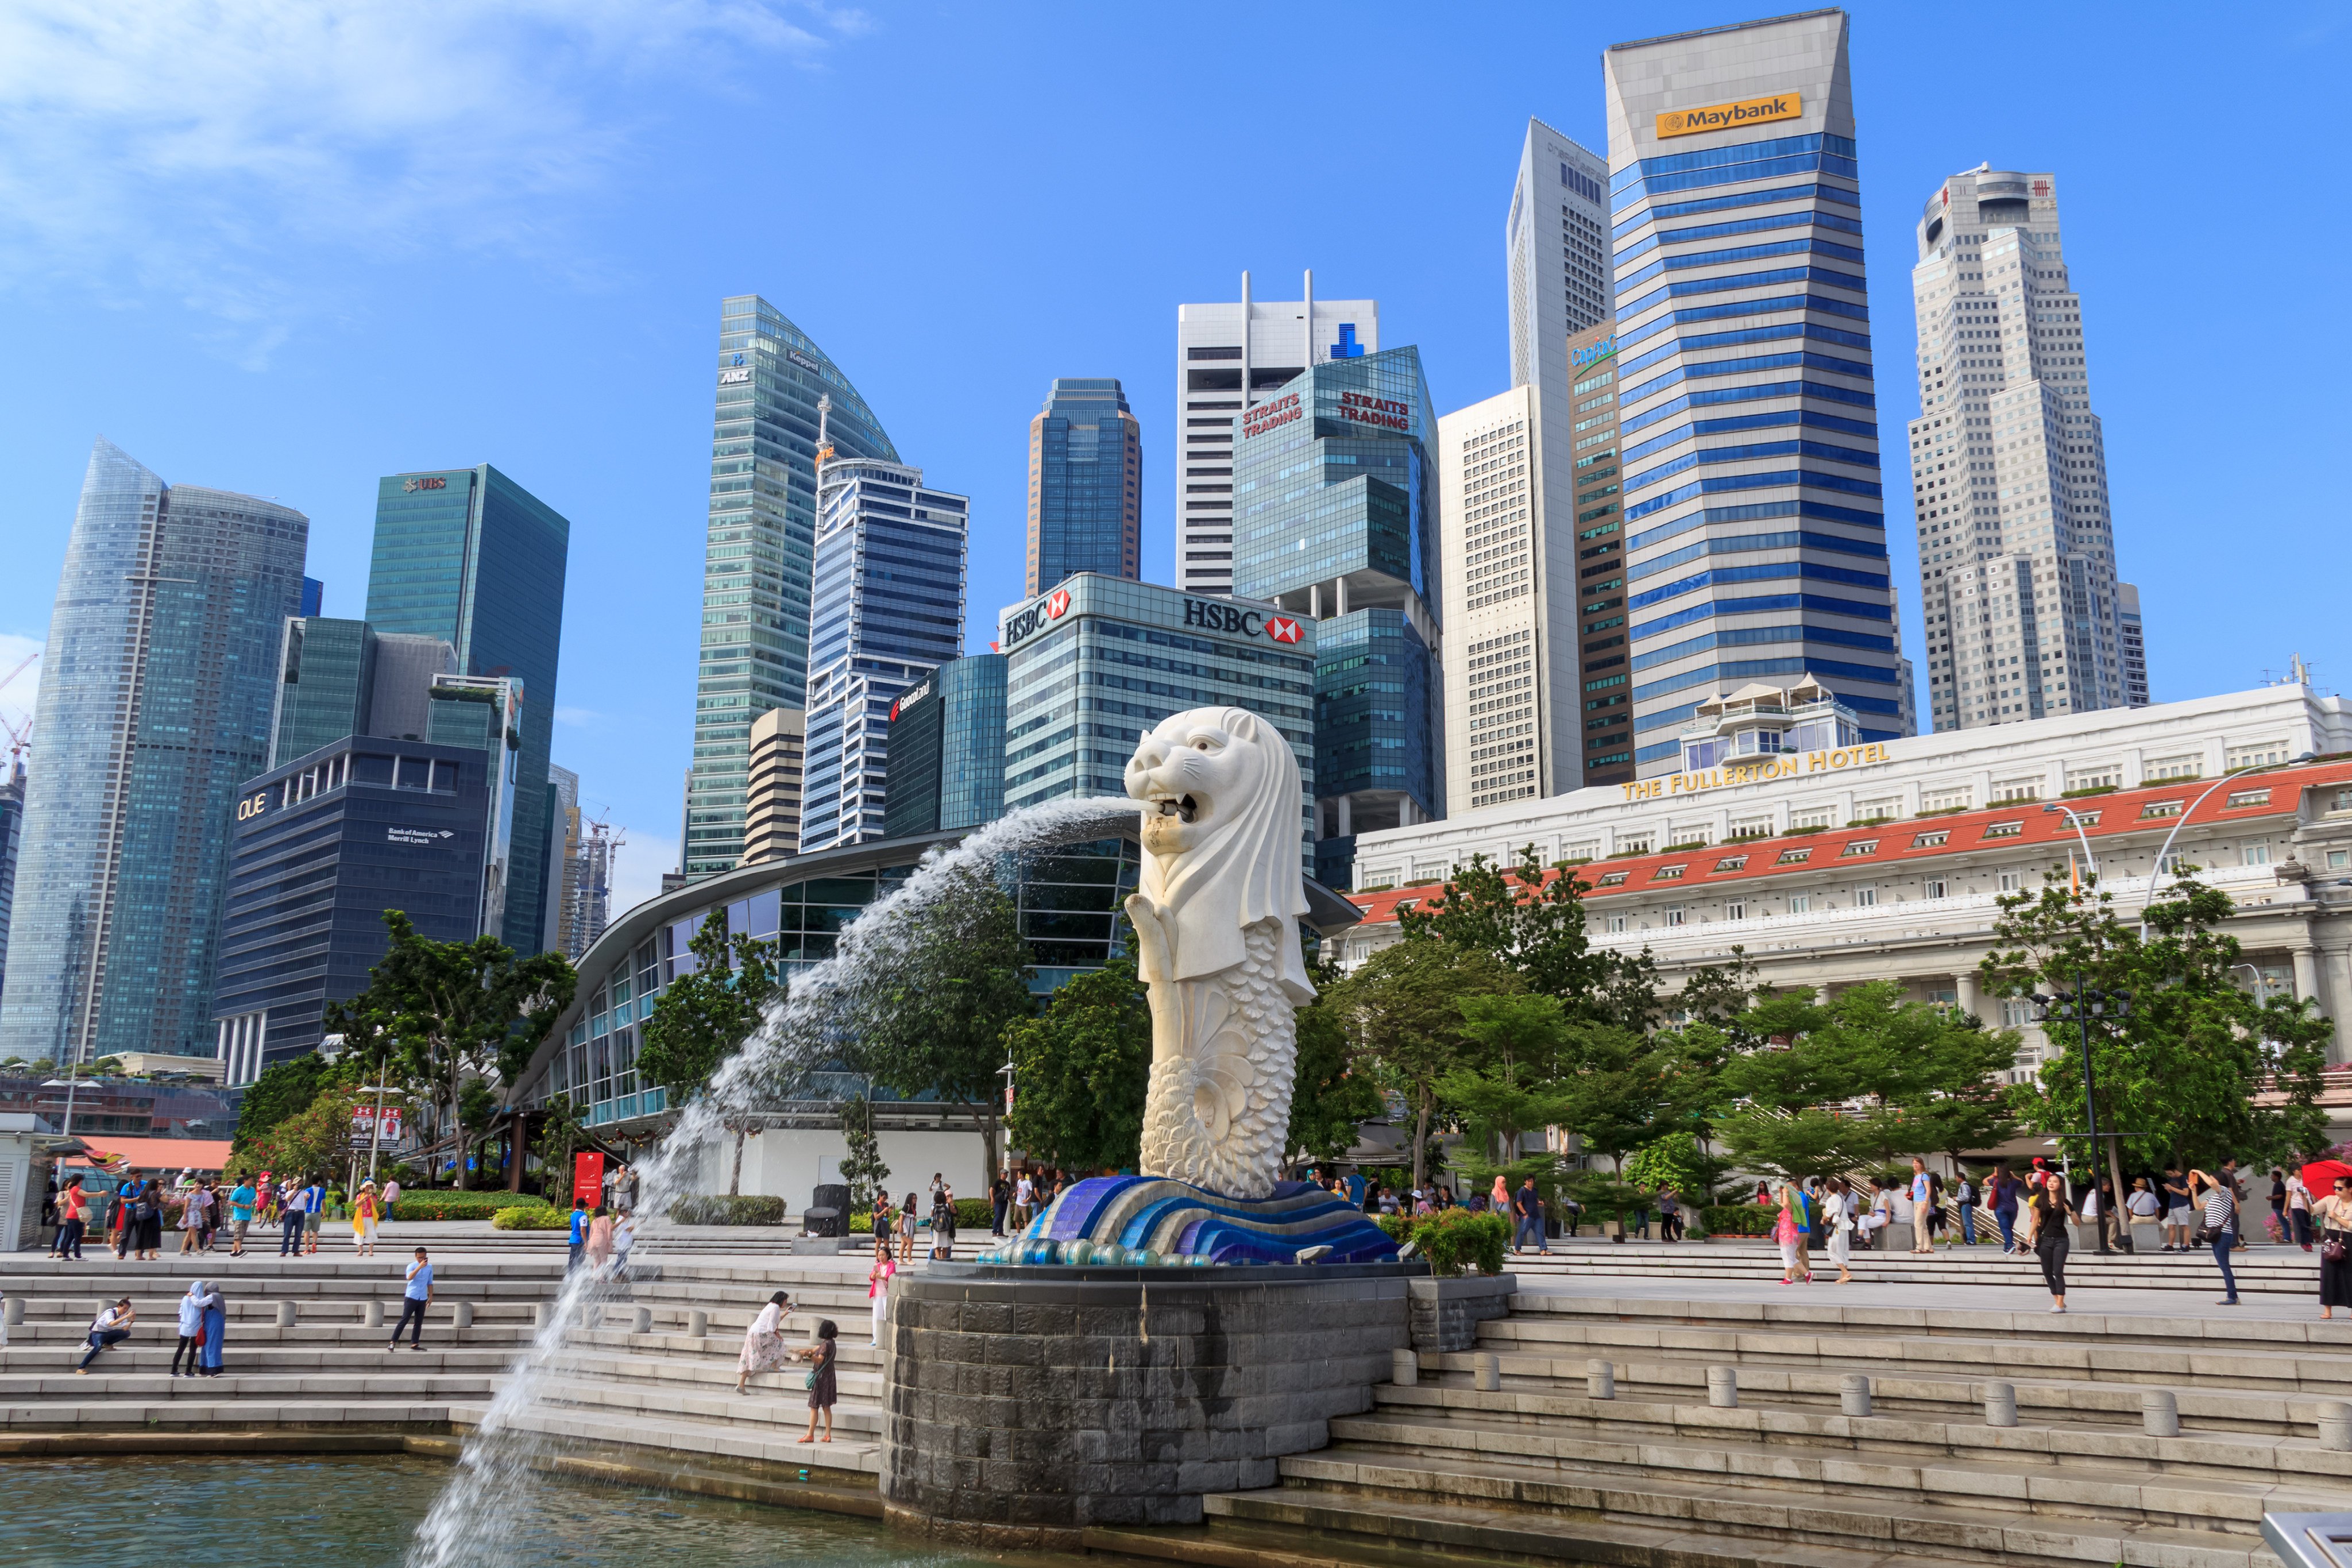 Singapore’s skyline. A man was sentenced to 15 weeks’ jail after pleading guilty to two charges of voyeurism. Photo: Shutterstock